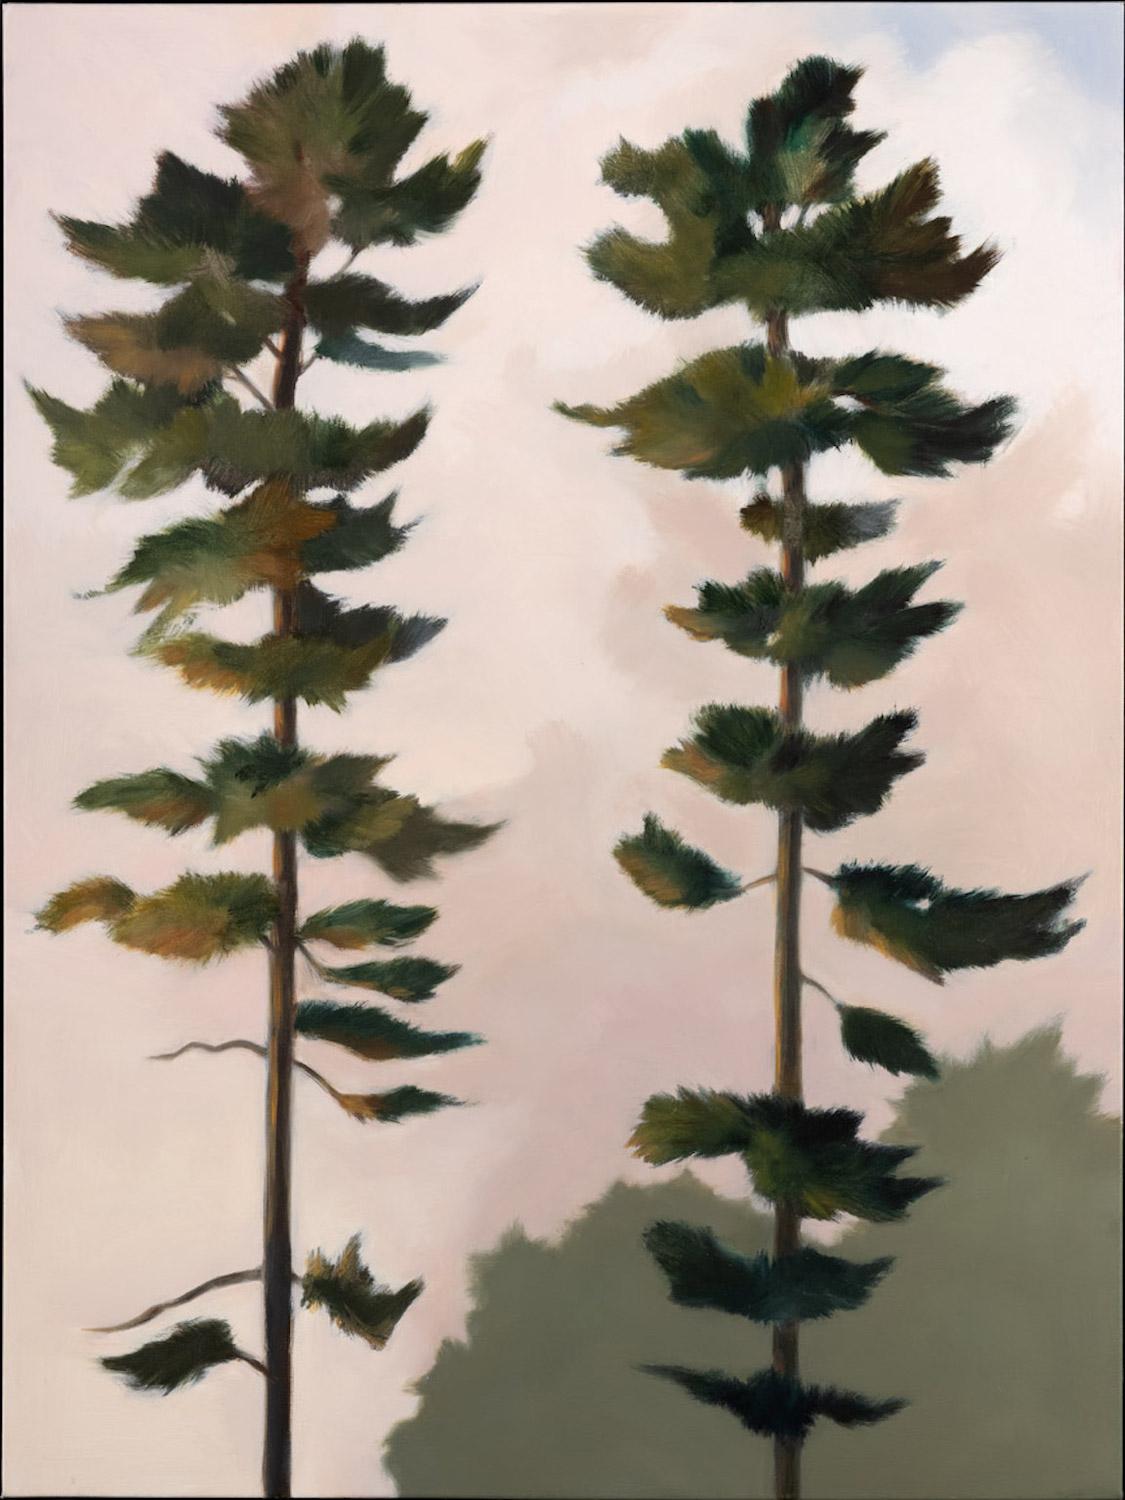 "Two Very Tall Pines", oil painting, landscape, blue, green, gold, pink - Painting by Anne Sargent Walker